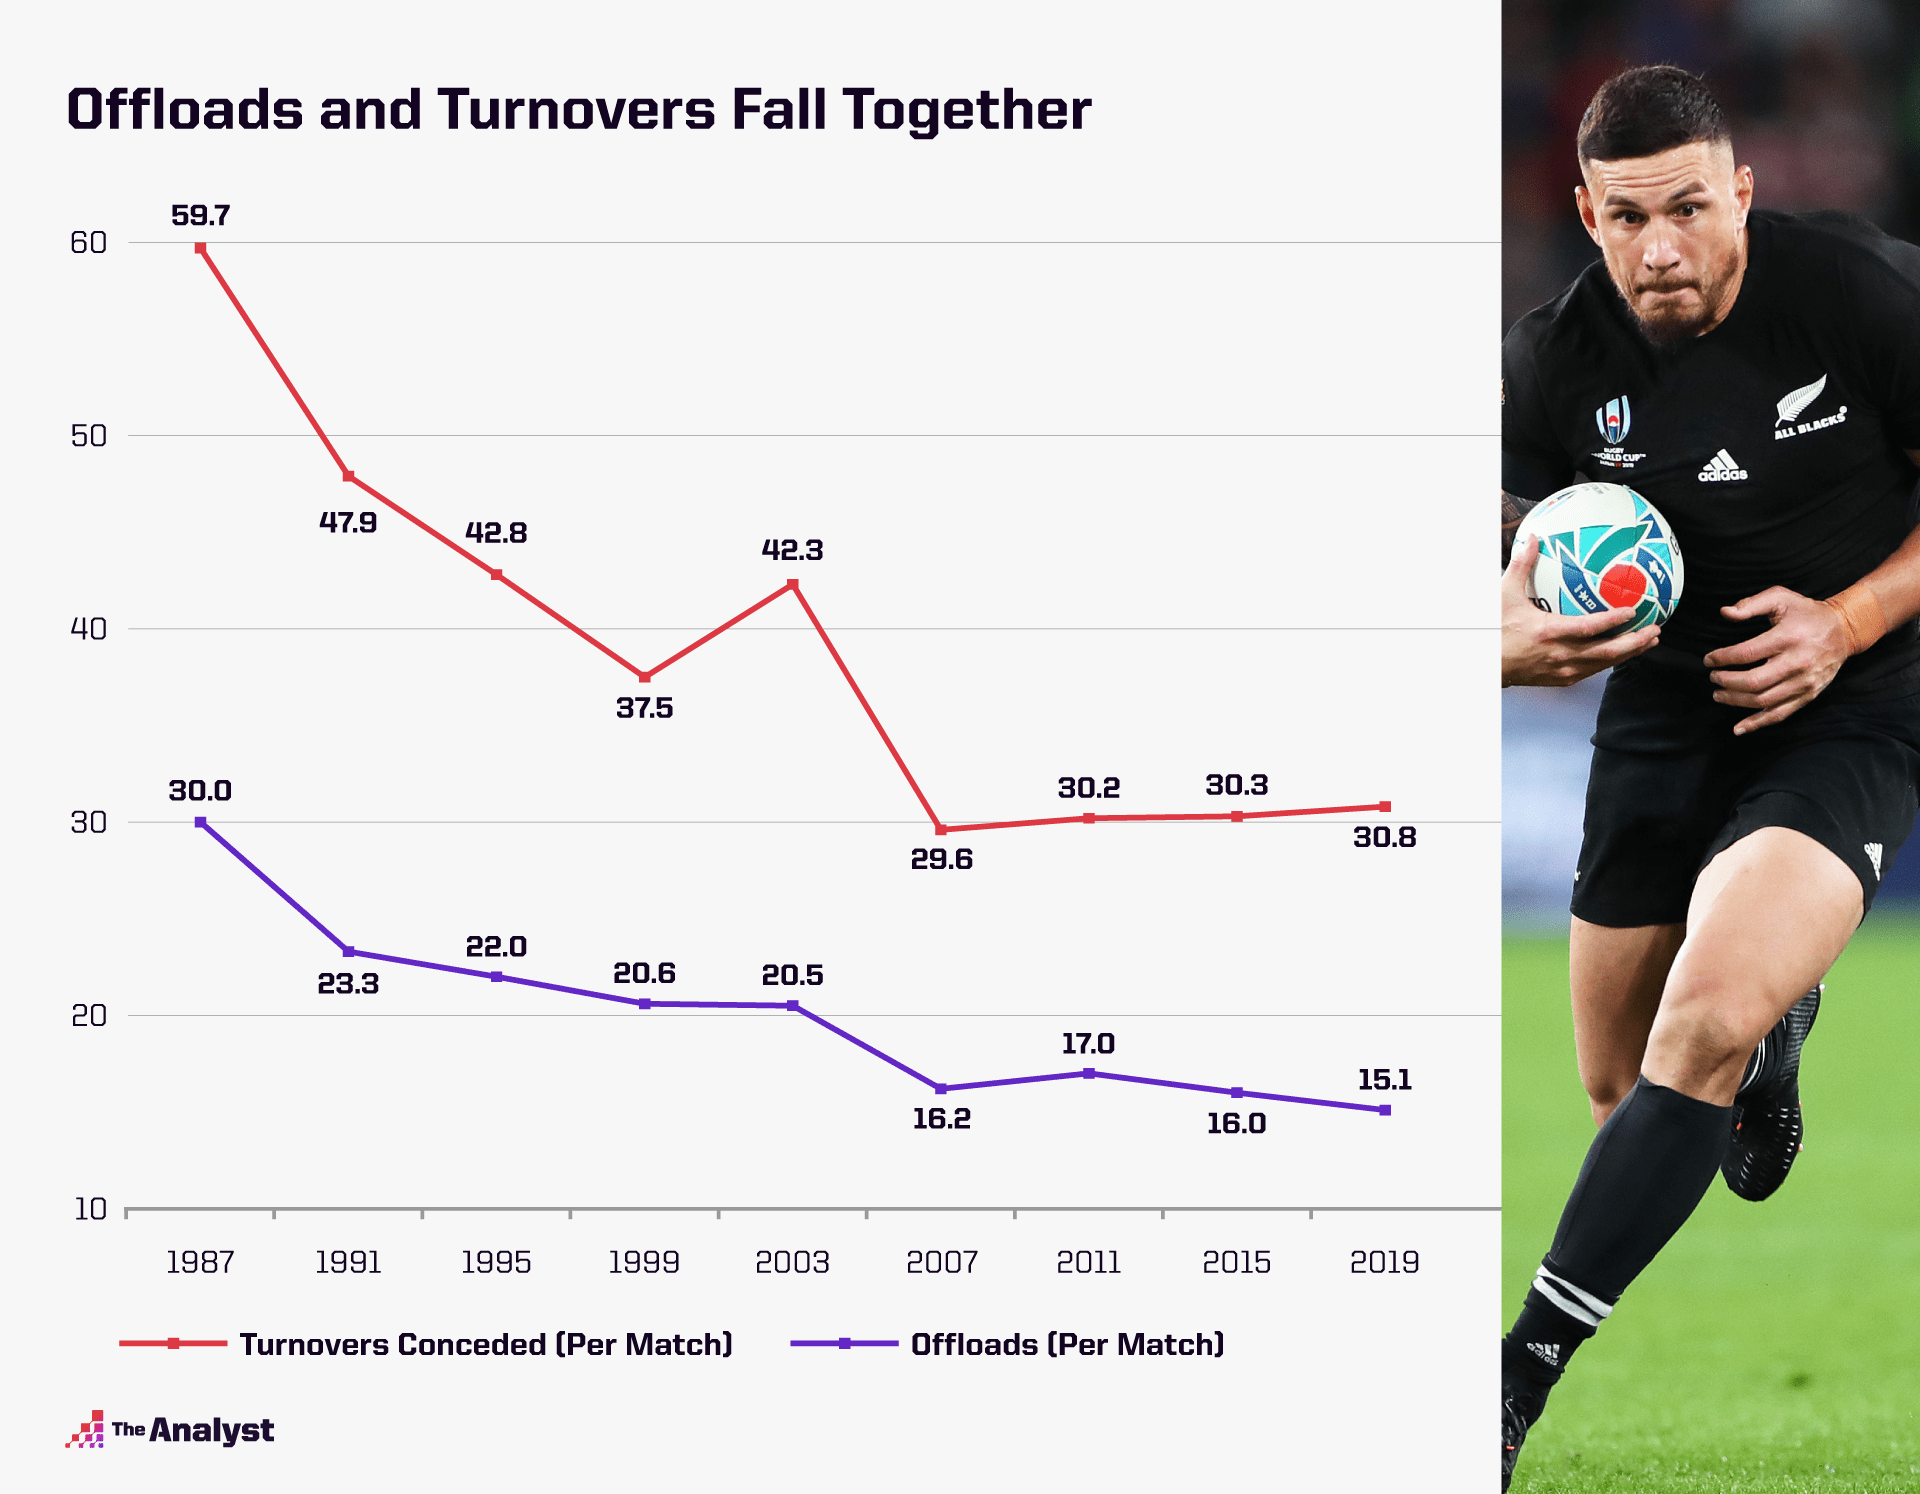 Decline in offloads and turnovers in World Cup rugby